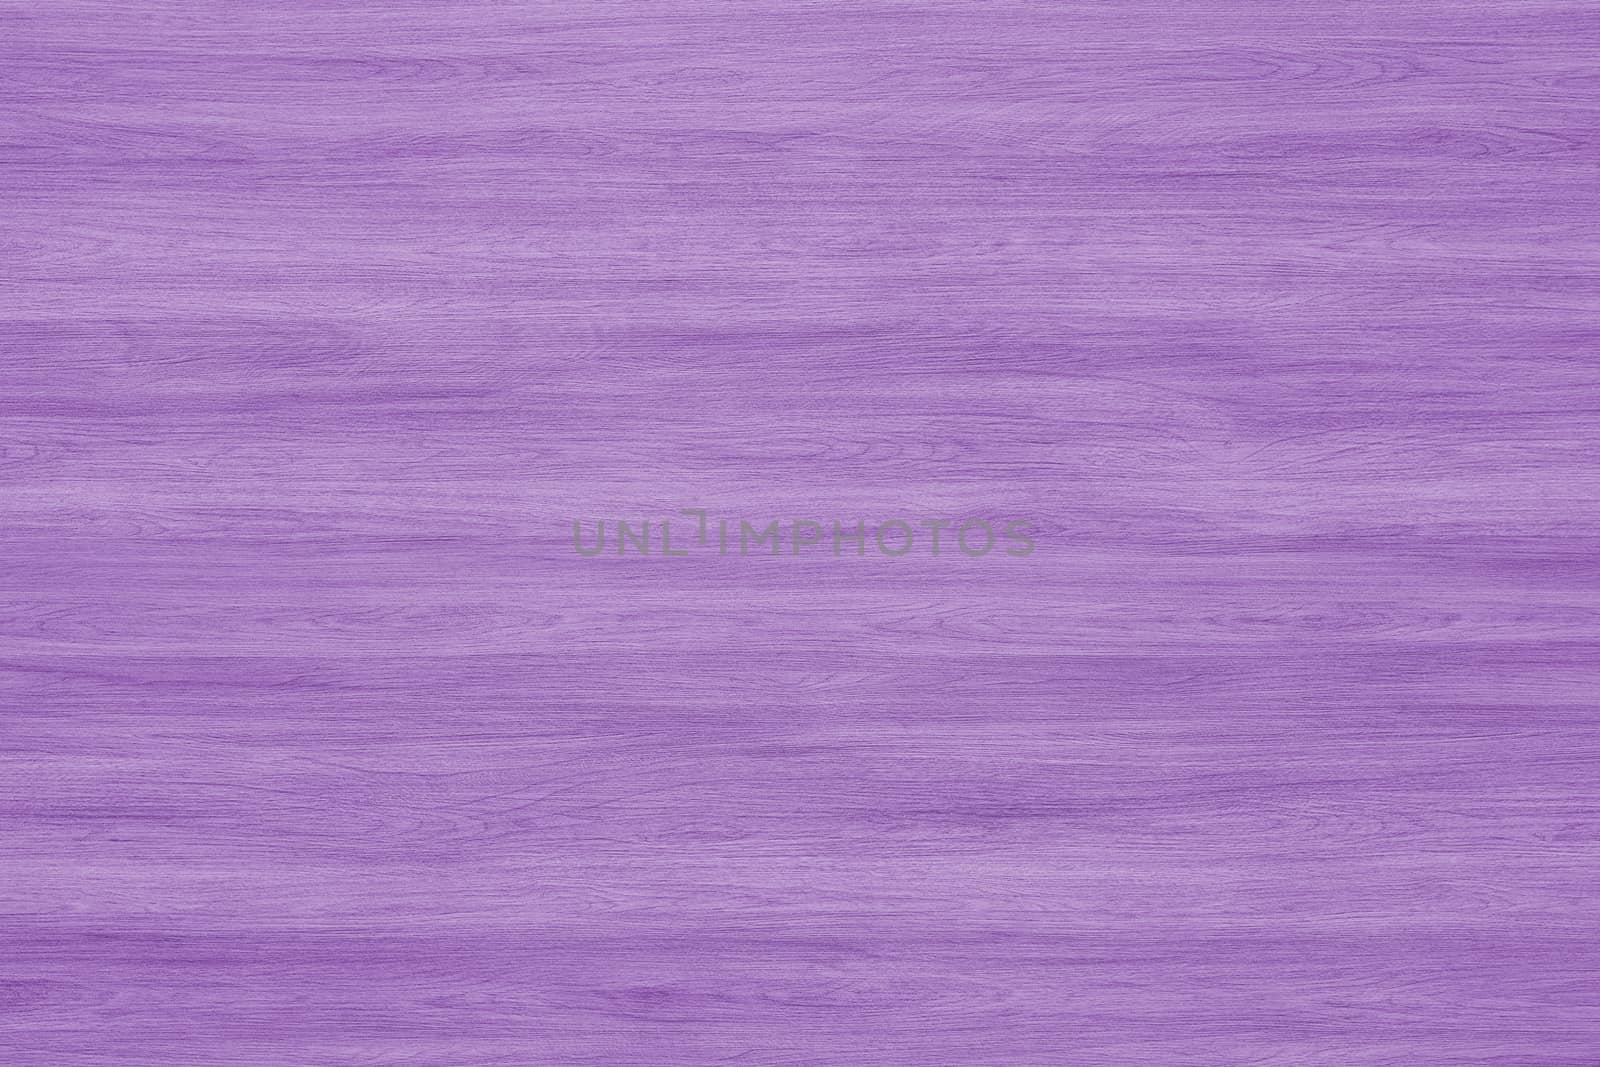 Ultra Violet Wooden background, Texture of Purple color paint plank wall for background by ivo_13